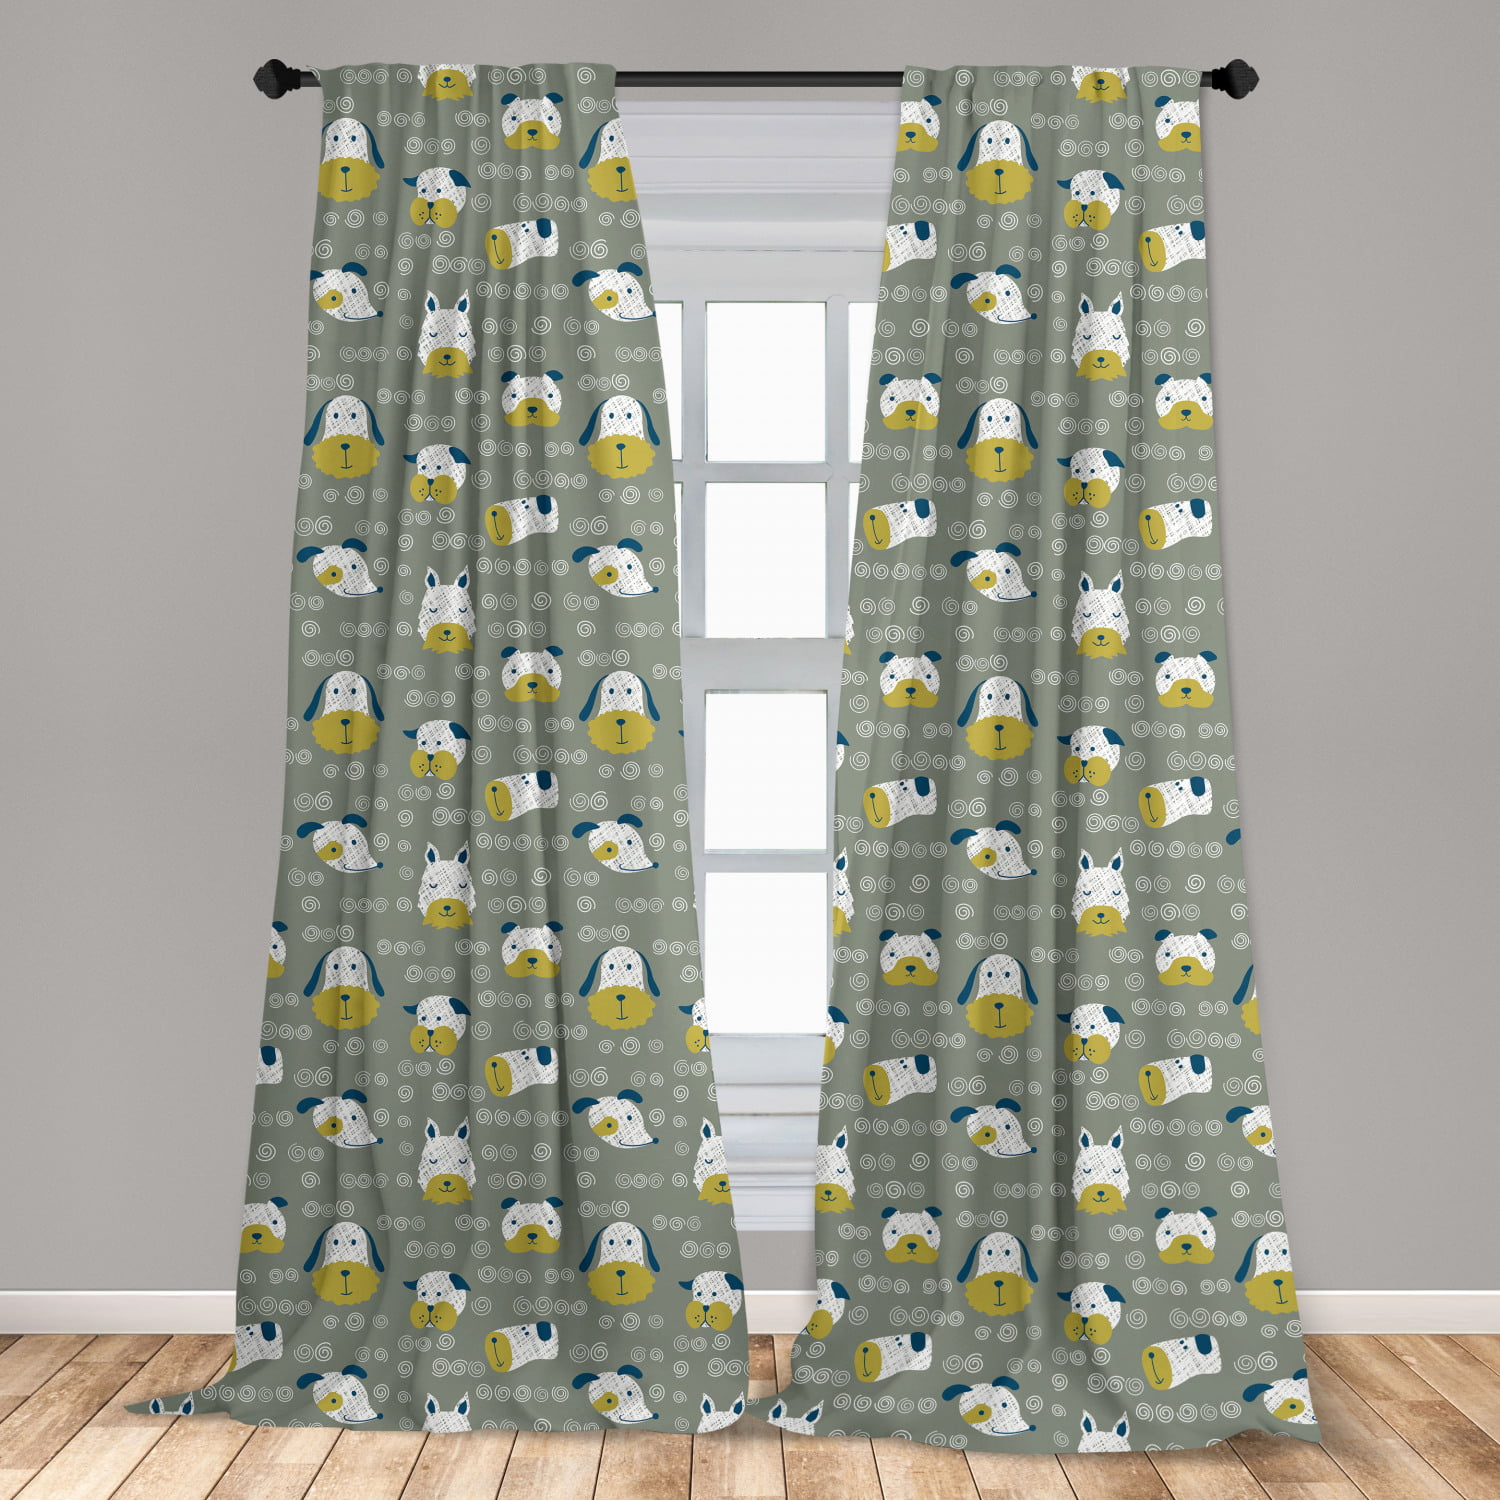 Yellow Curtains Geometric Green Figures Window Drapes 2 Panel Set 108x84 Inches 